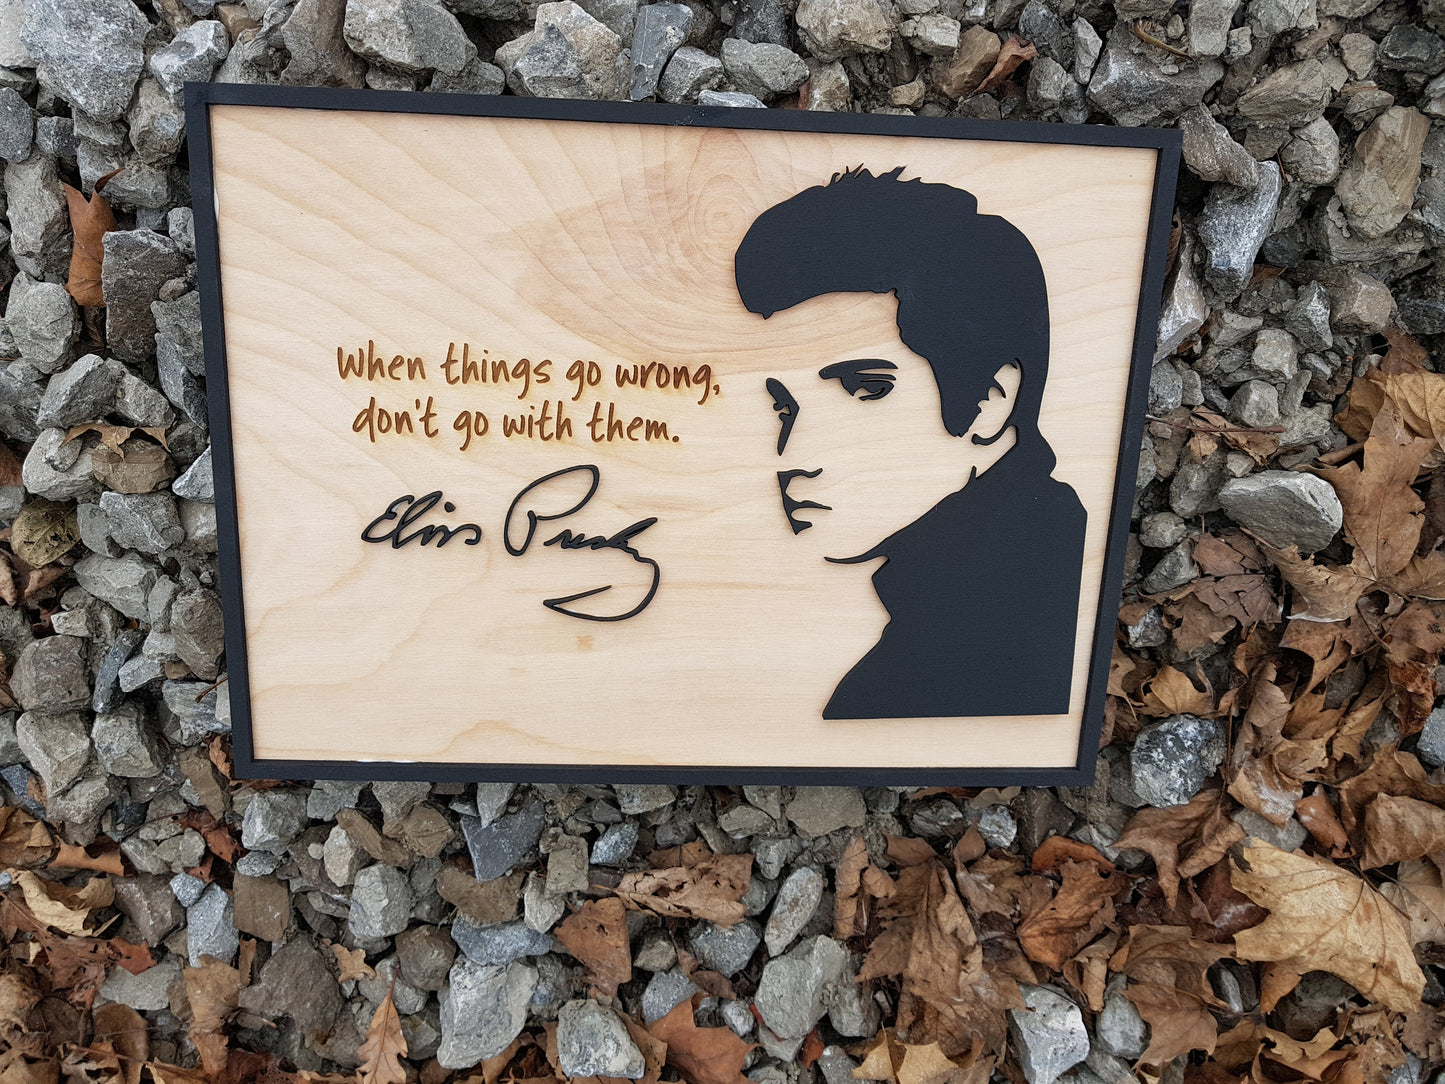 Elvis Presley Wood Quote, Sign, 3D, Unique, When Things Go Wrong, wood decor shabby chic rustic primitive, handwriting engraved ooak